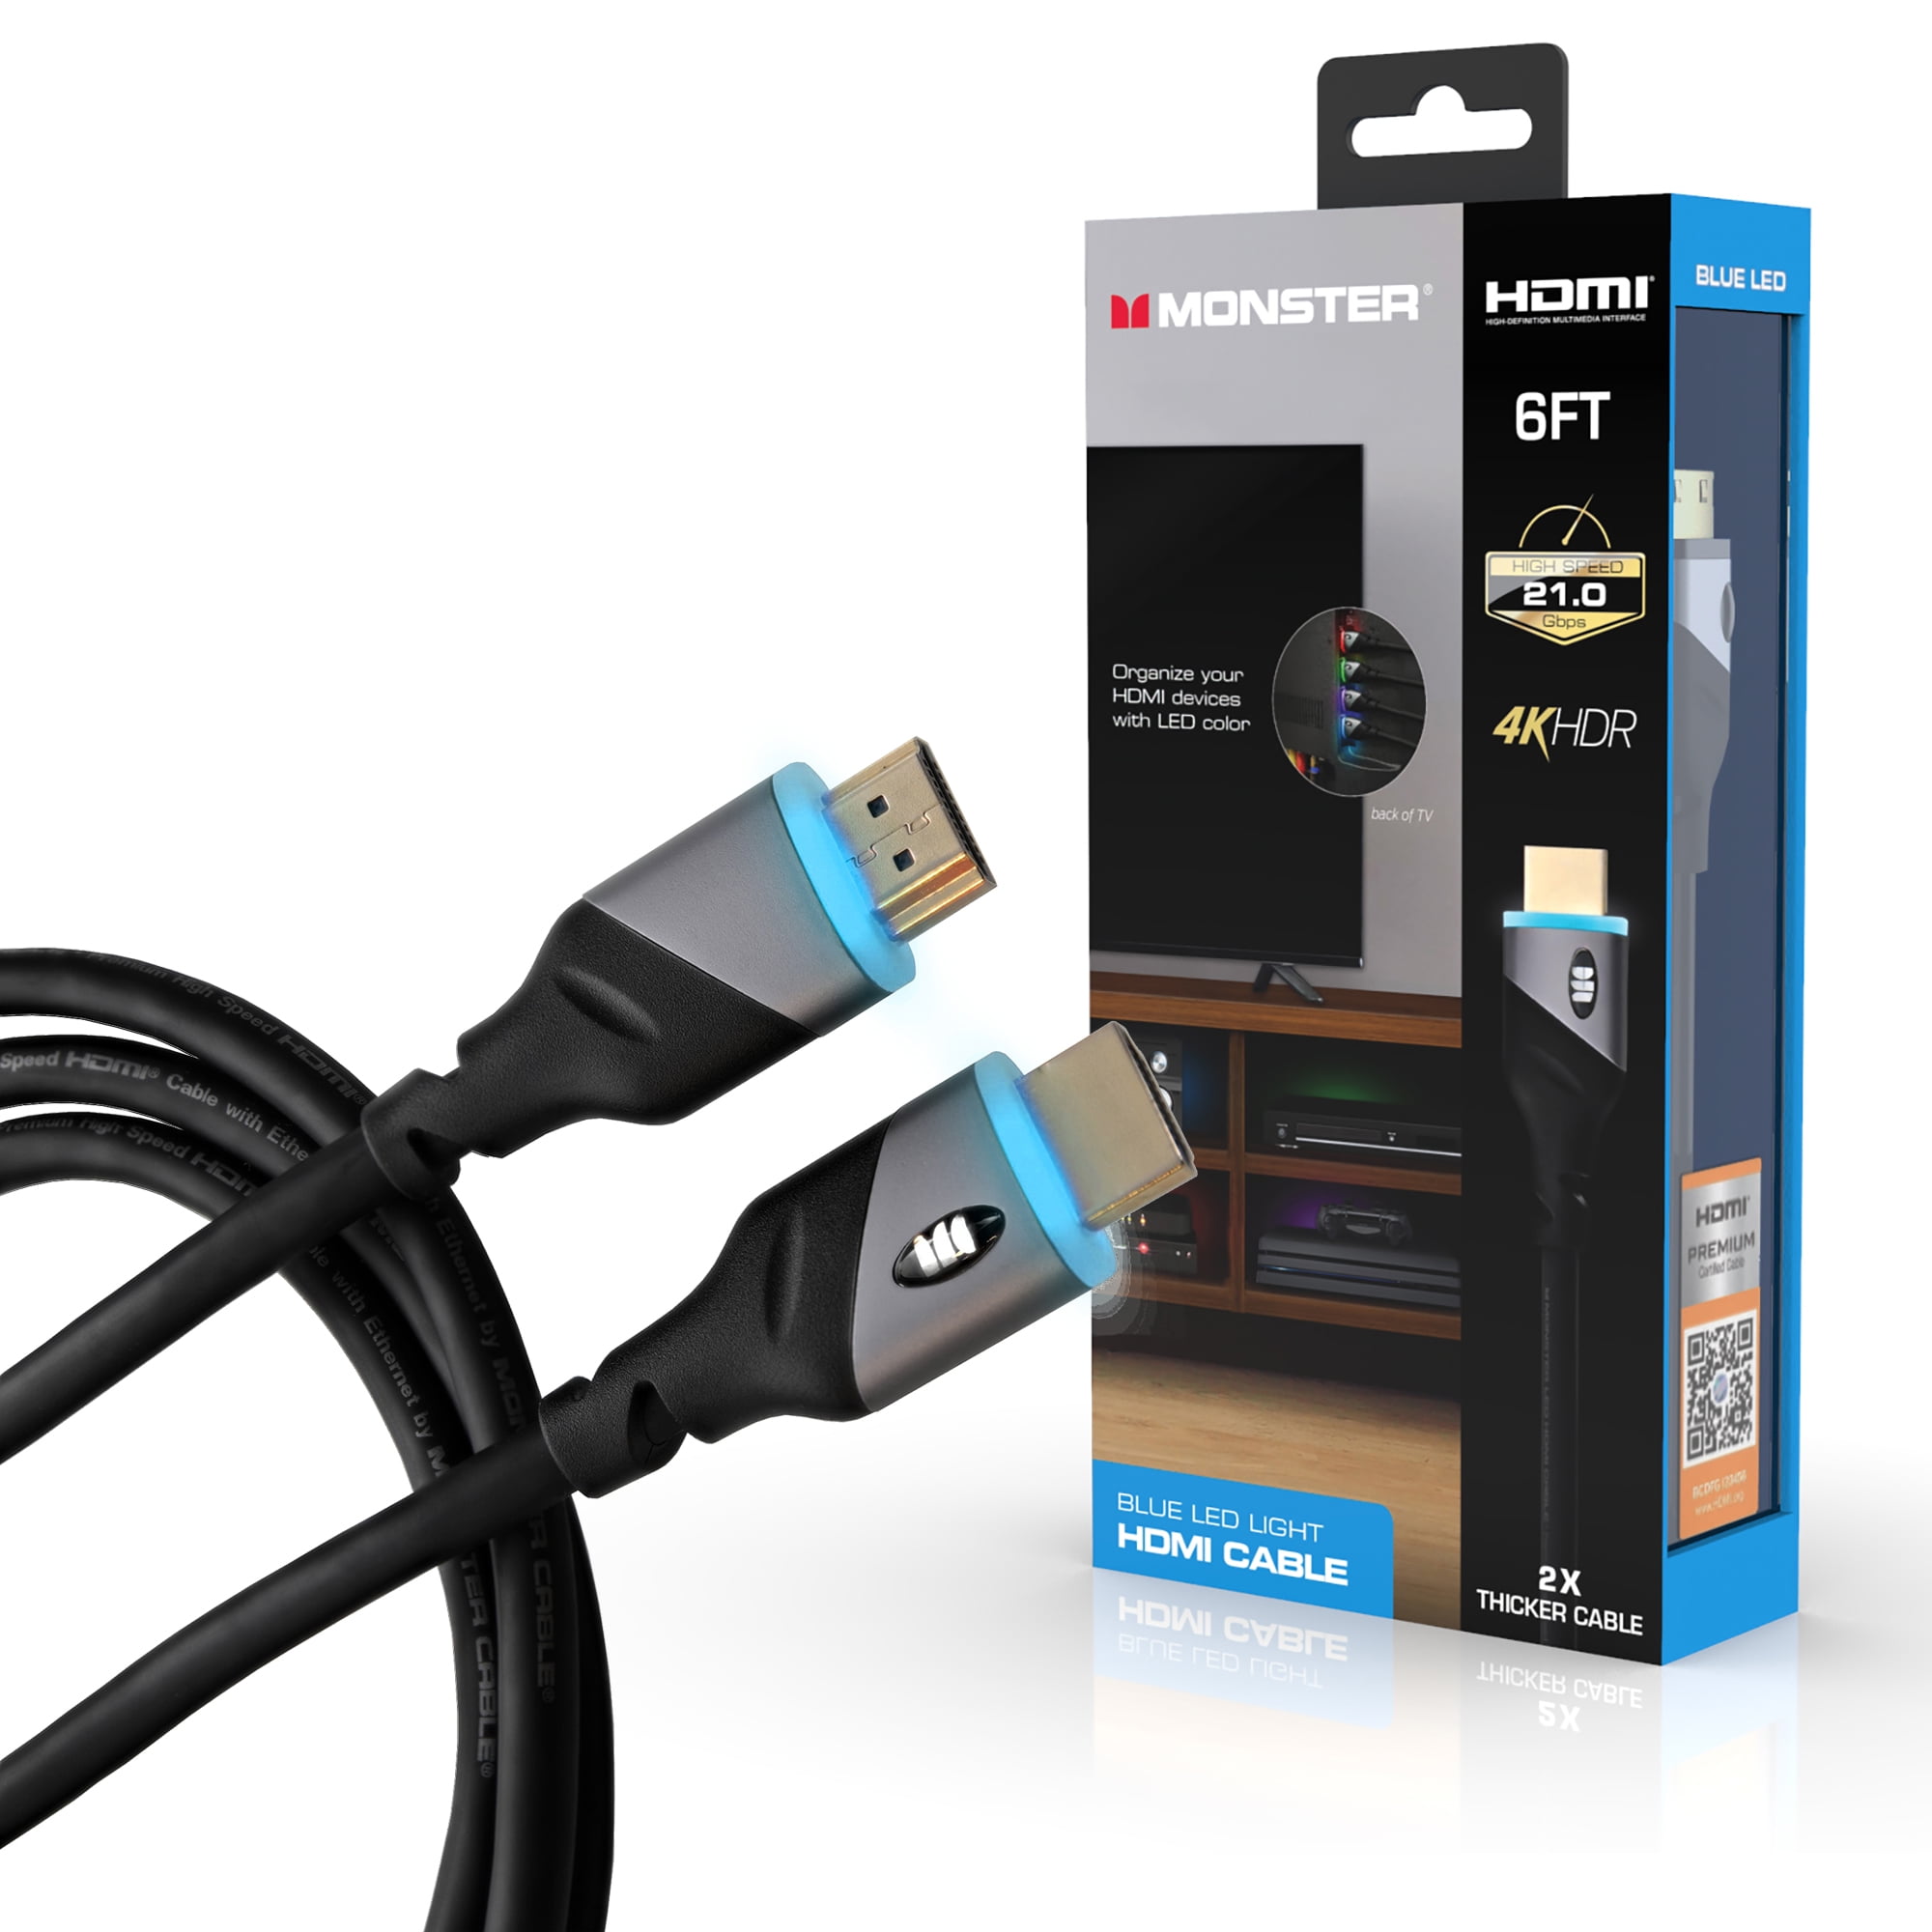 Monster High 4K HDR HDMI Cable with Built-in LED Light, Blue 6 Cord - Walmart.com